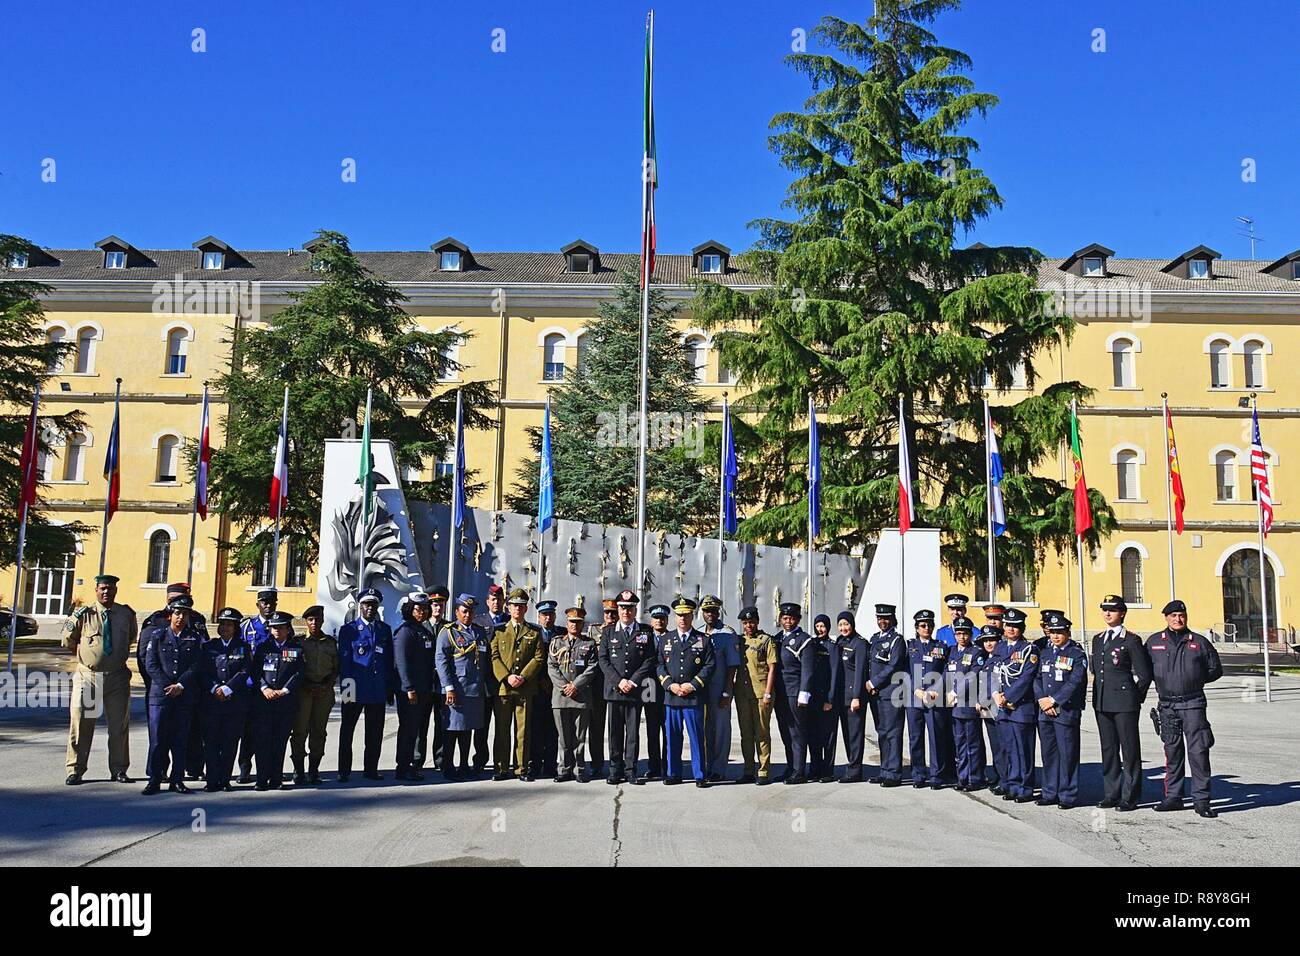 Brig. Gen. Giovanni Pietro Barbano (center), Center of Excellence for Stability Police Units (CoESPU) director, U.S. Army Col. Darius S. Gallegos, CoESPU deputy director and students from Europe, Africa, Italy and the U.S. pose for a group photo during the opening ceremony of the 5th “Gender Protection in Peace Operations” Course at the CoESPU in Vicenza, Italy, Mar. 8, 2017. Stock Photo